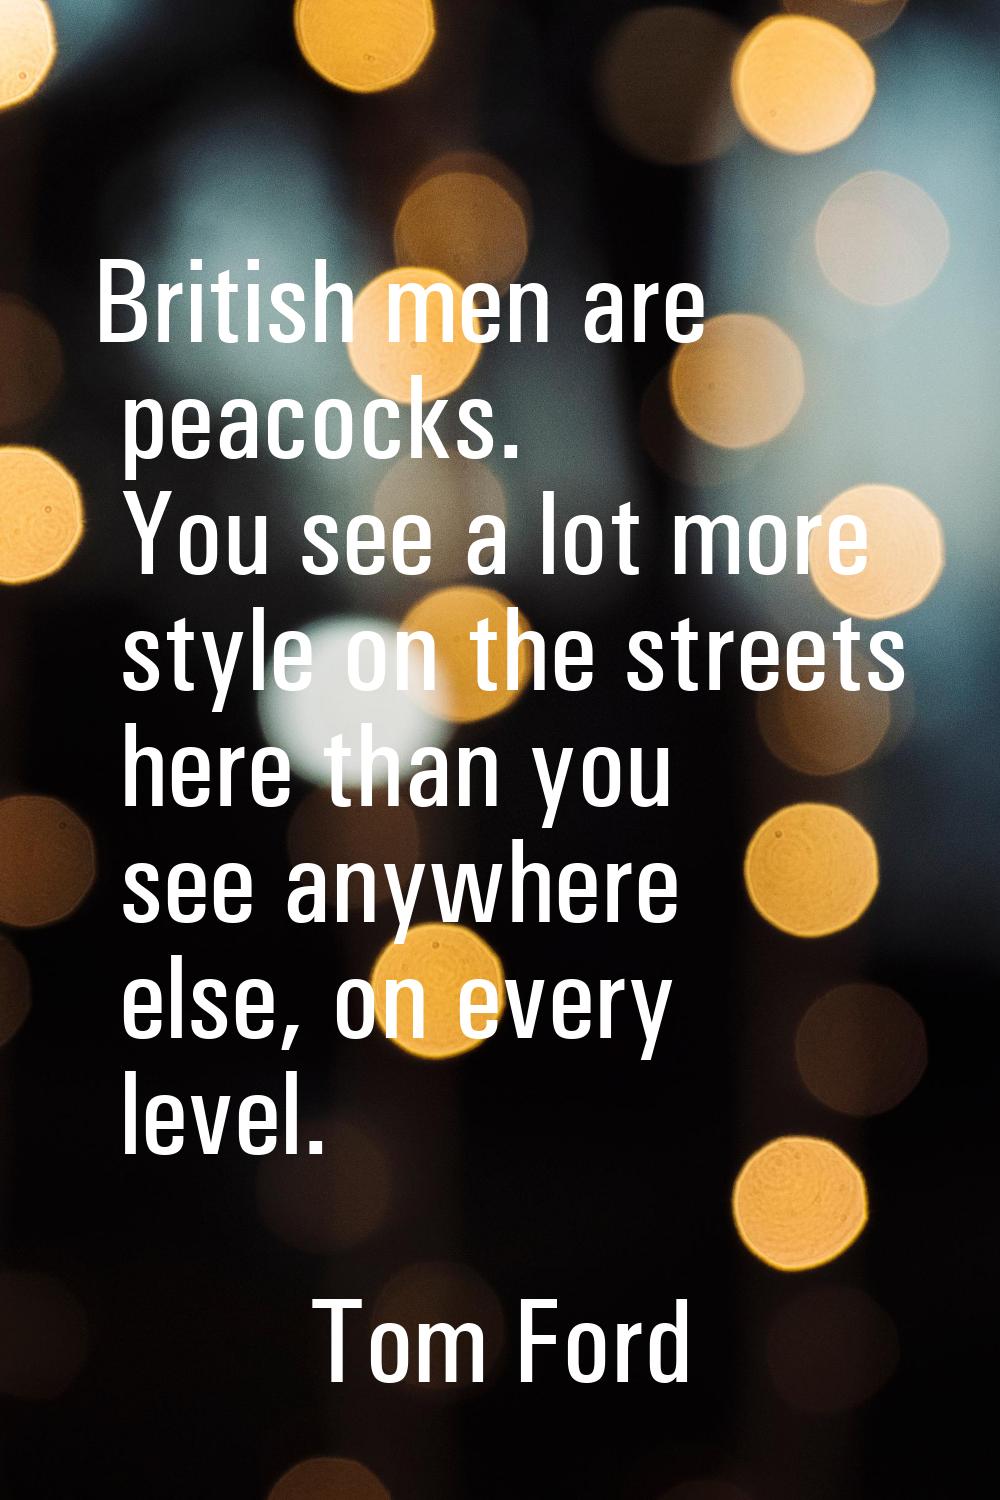 British men are peacocks. You see a lot more style on the streets here than you see anywhere else, 